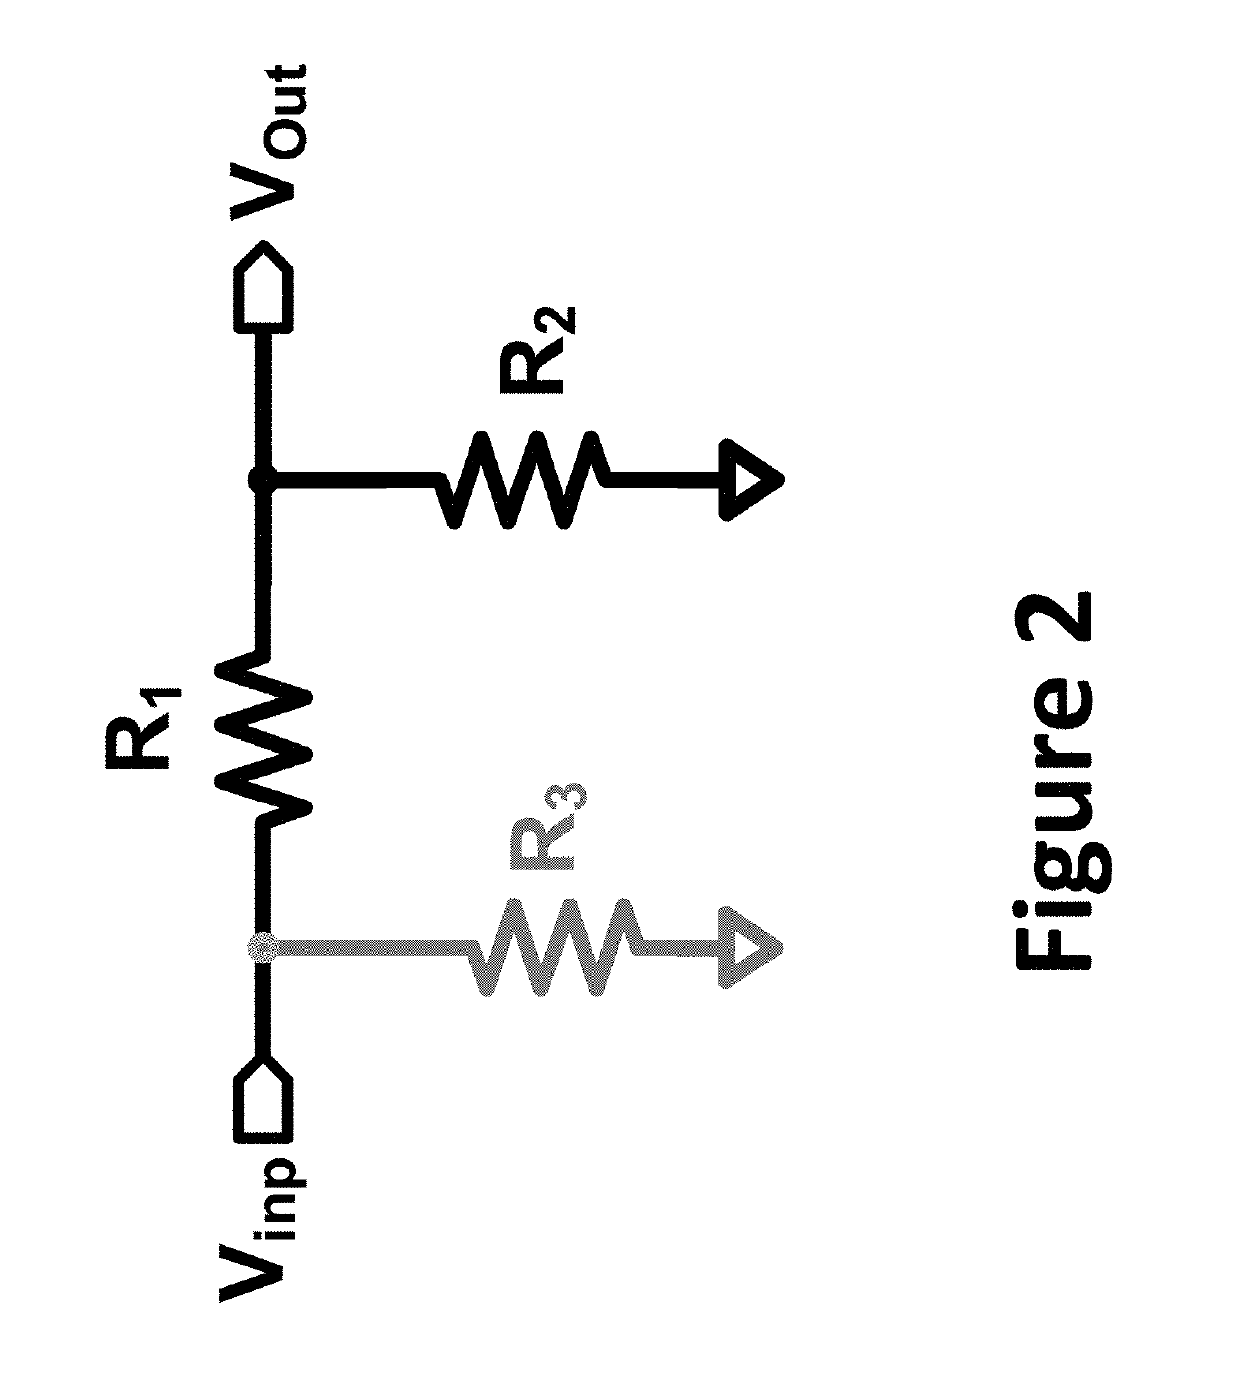 Input termination circuits for high speed receivers